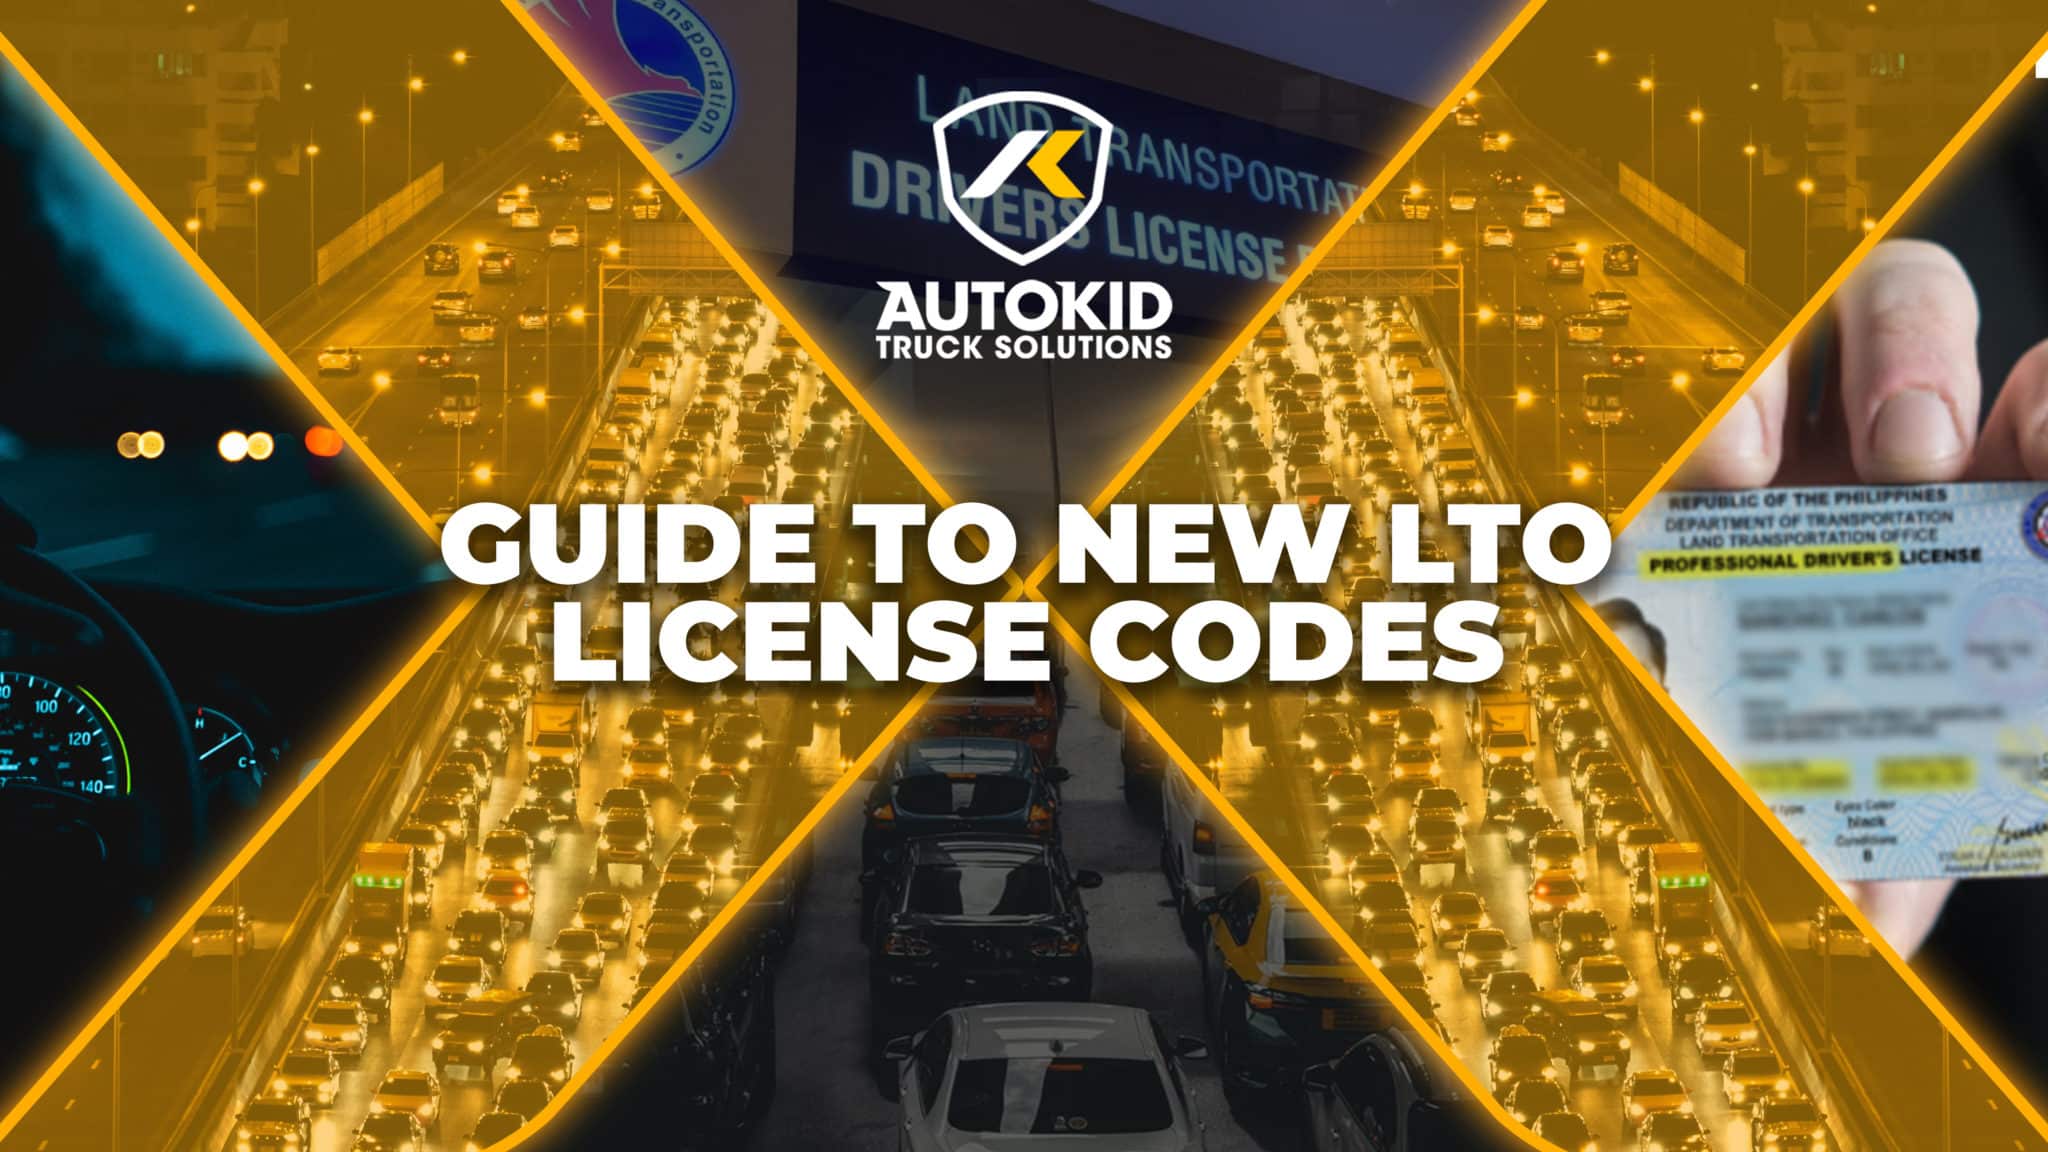 Guide to New LTO License Codes - Autokid